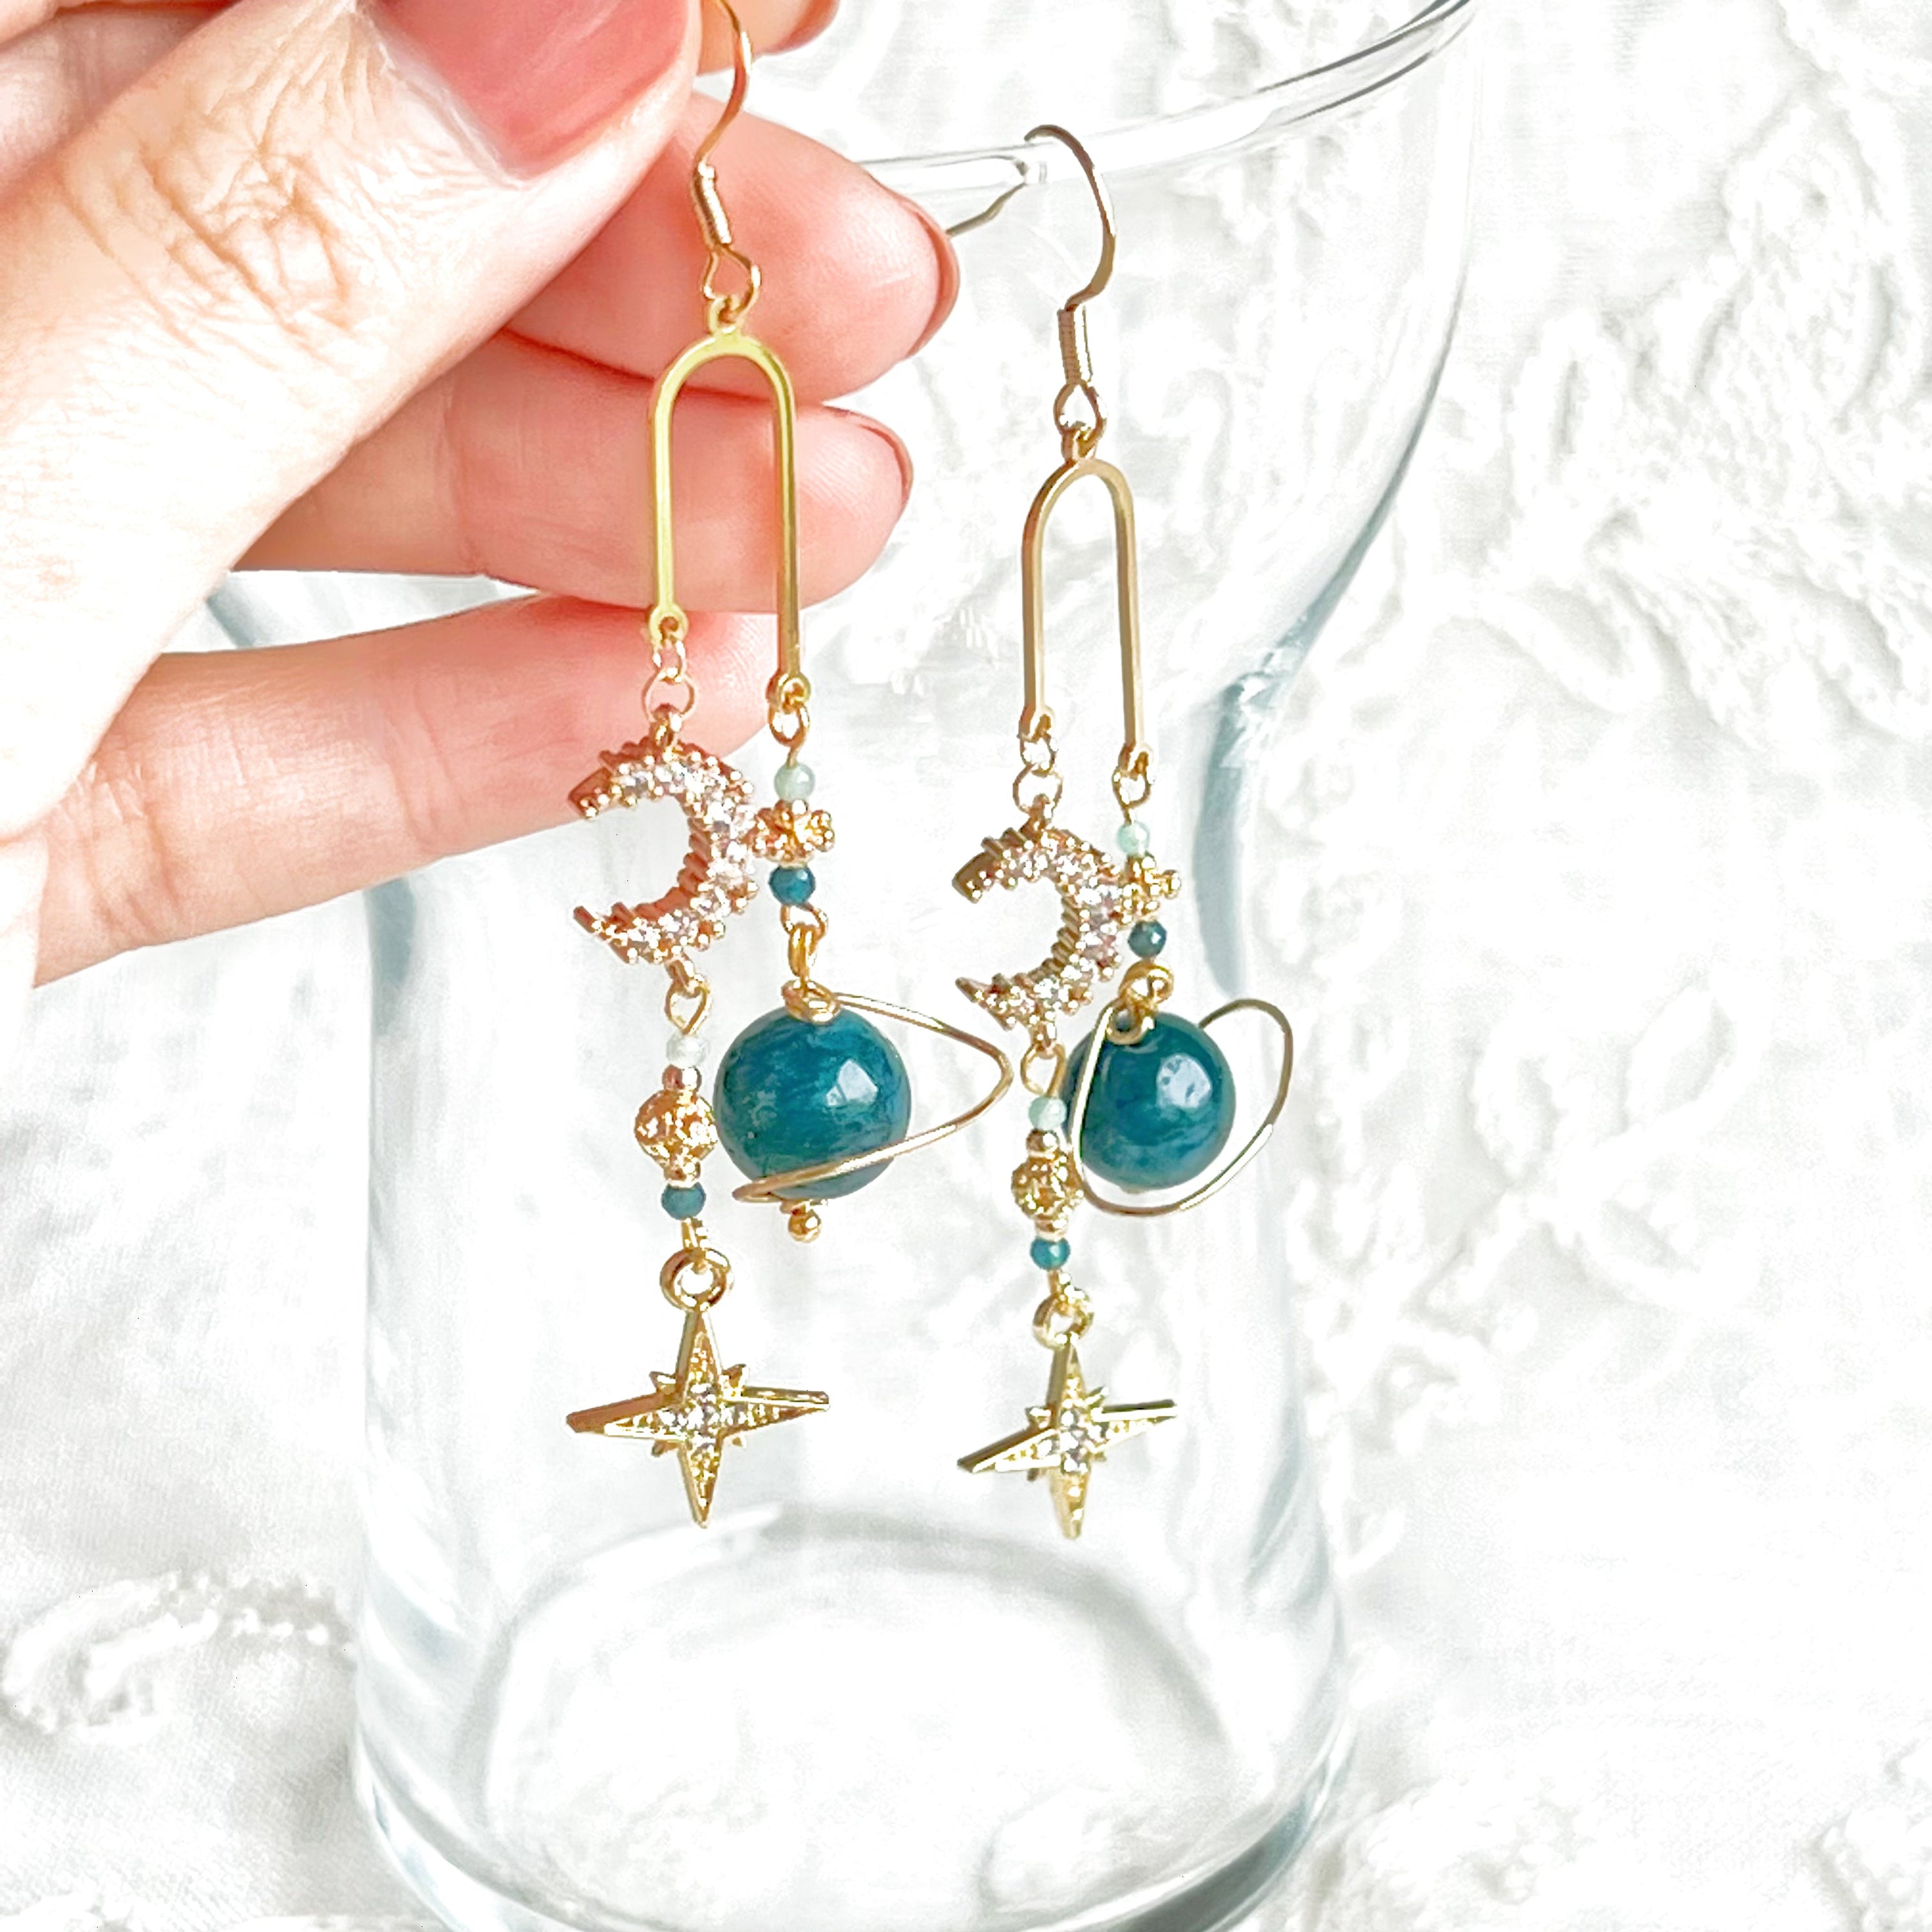 Green Apatite Planet Moon and North Star Drop Earrings - Jewelry & Watches - Bijou Her -  -  - 